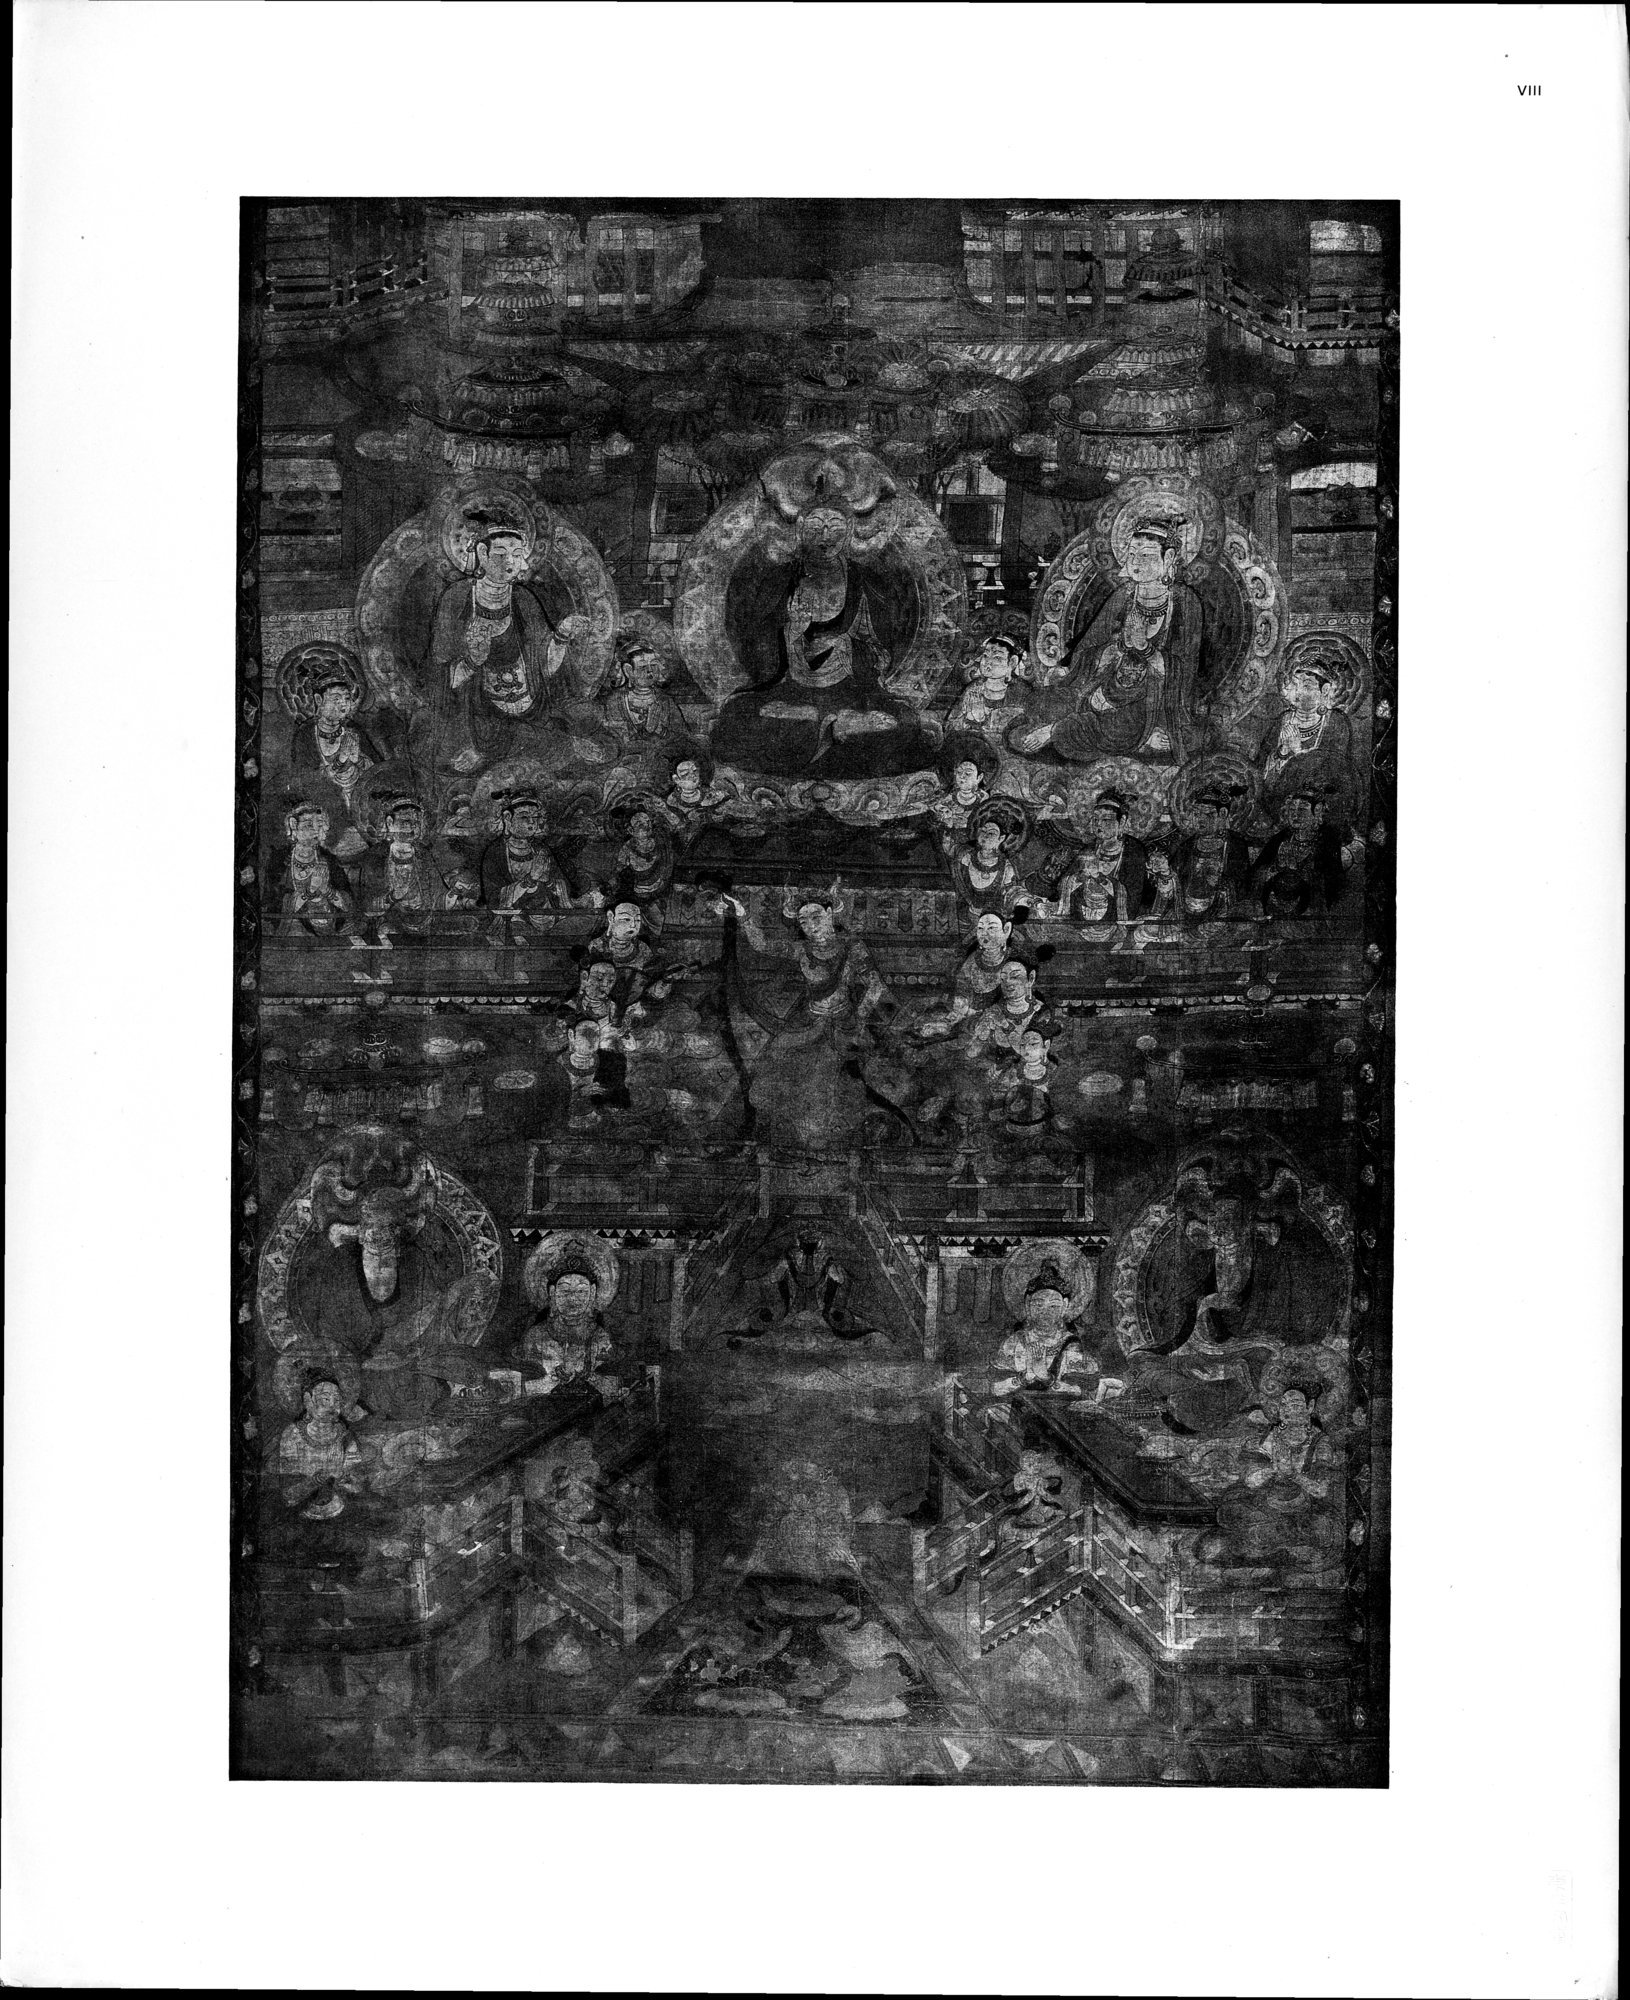 The Thousand Buddhas : vol.1 / Page 93 (Grayscale High Resolution Image)